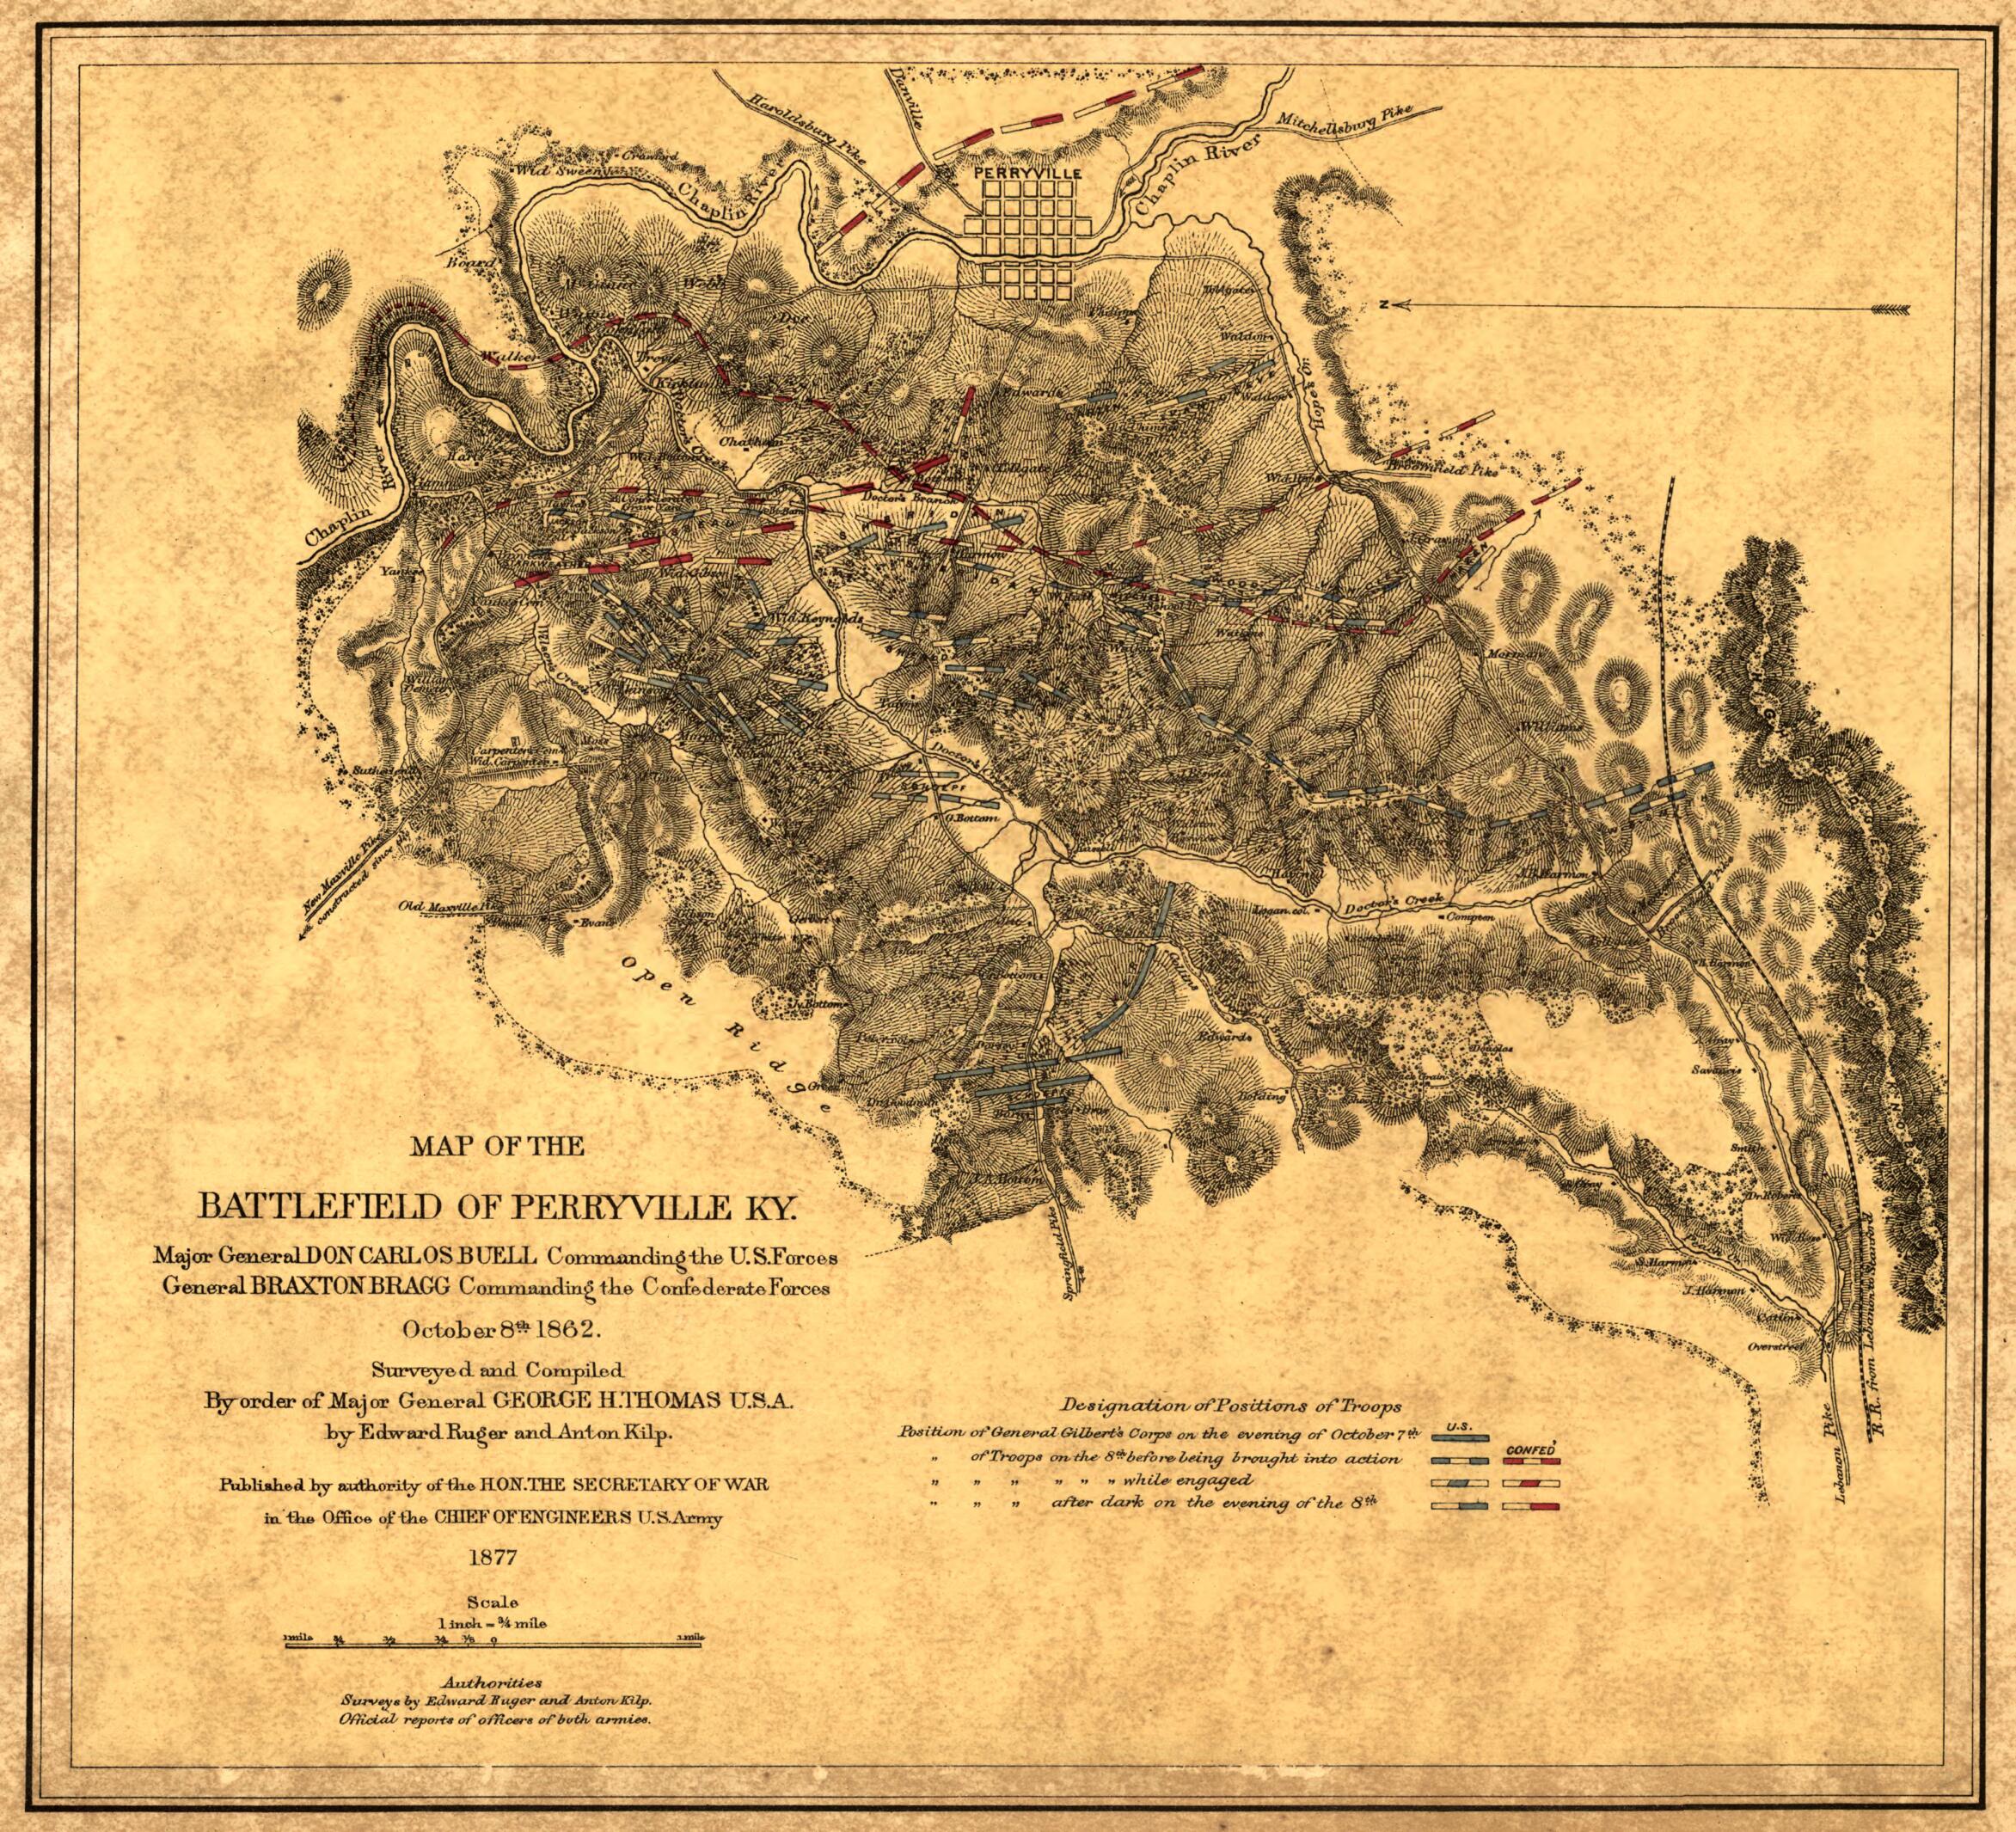 This old map of Map of the Battlefield of Perryville, Ky from 1877 was created by Anton Kilp, Edward Ruger in 1877